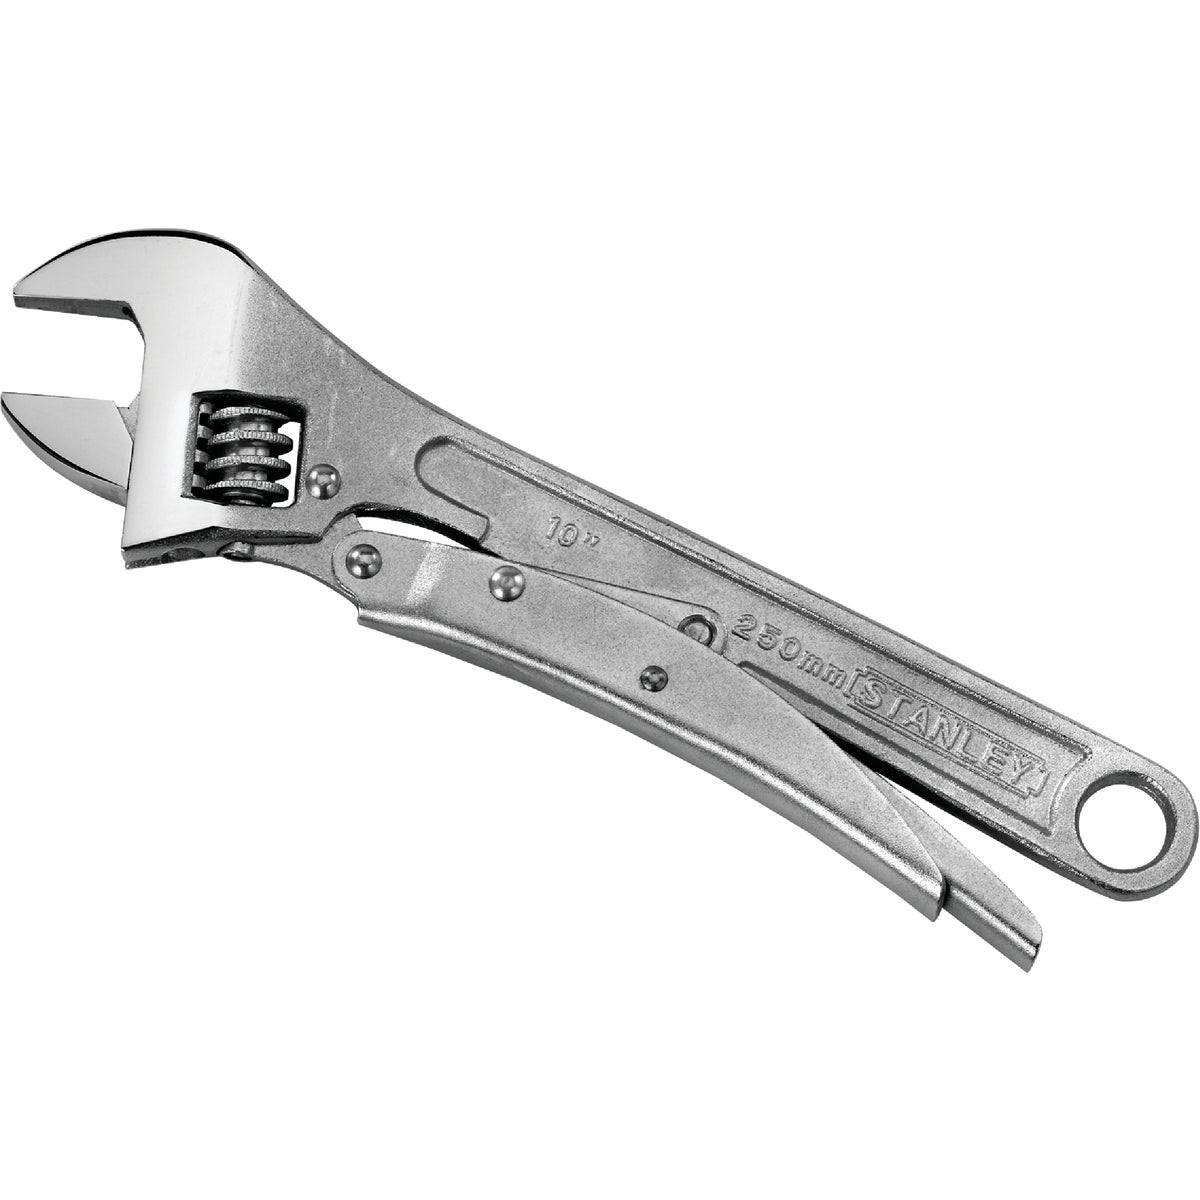 Item 319732, 2 tools in 1: Traditional adjustable wrench and locking pliers.